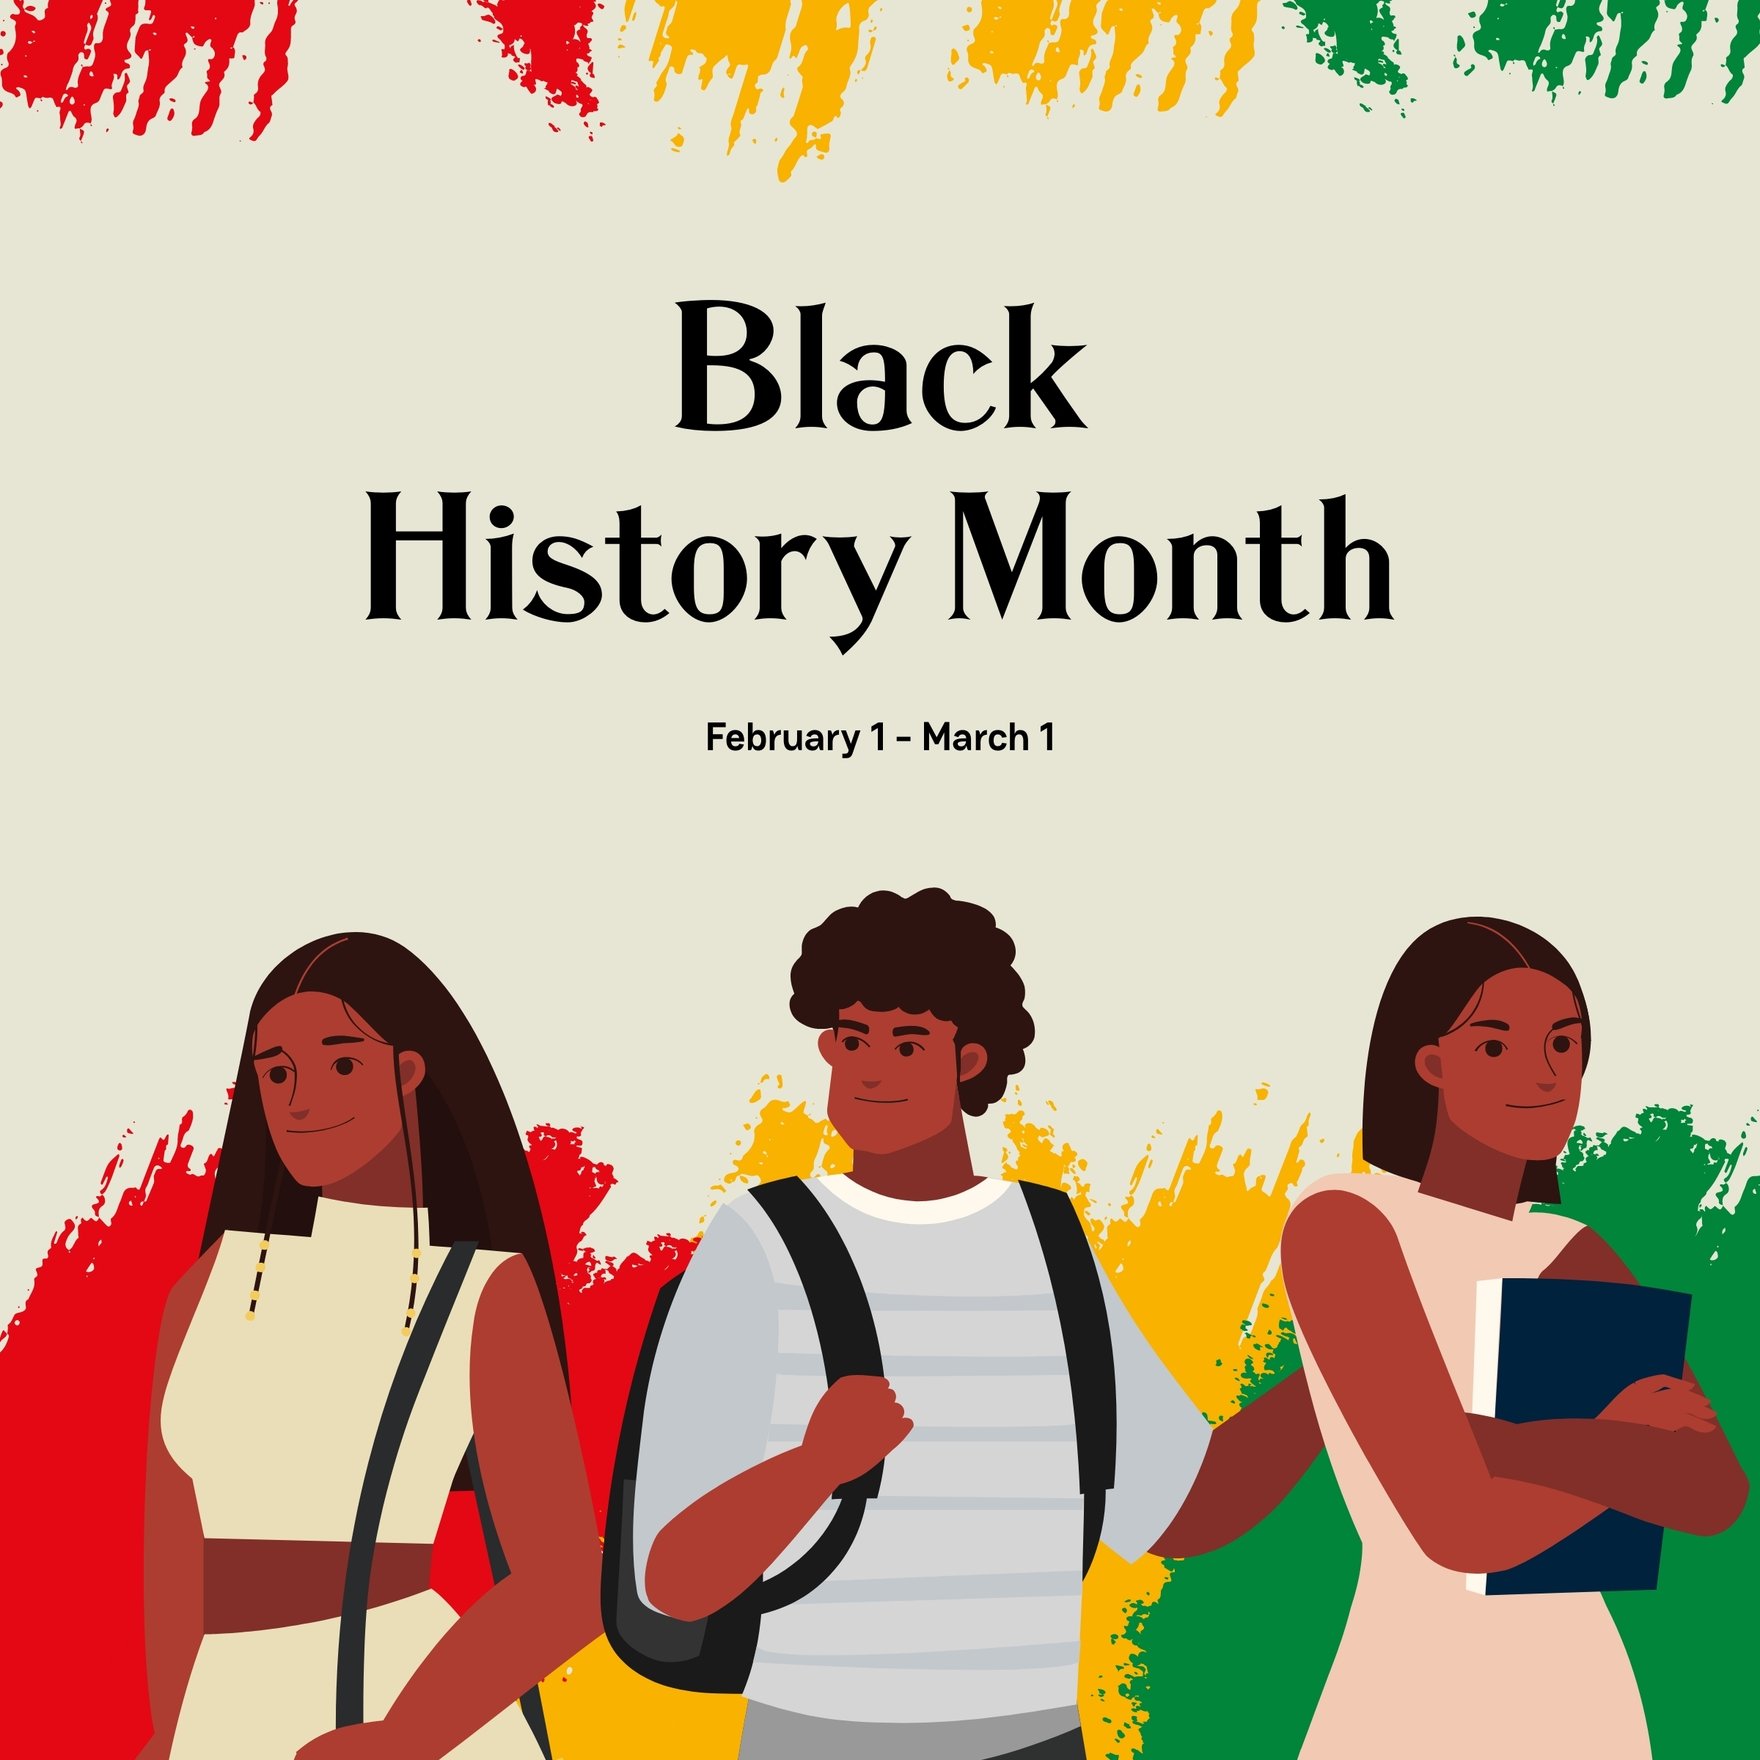 Black History Month WhatsApp Post in Illustrator, PSD, EPS, SVG, PNG, JPEG